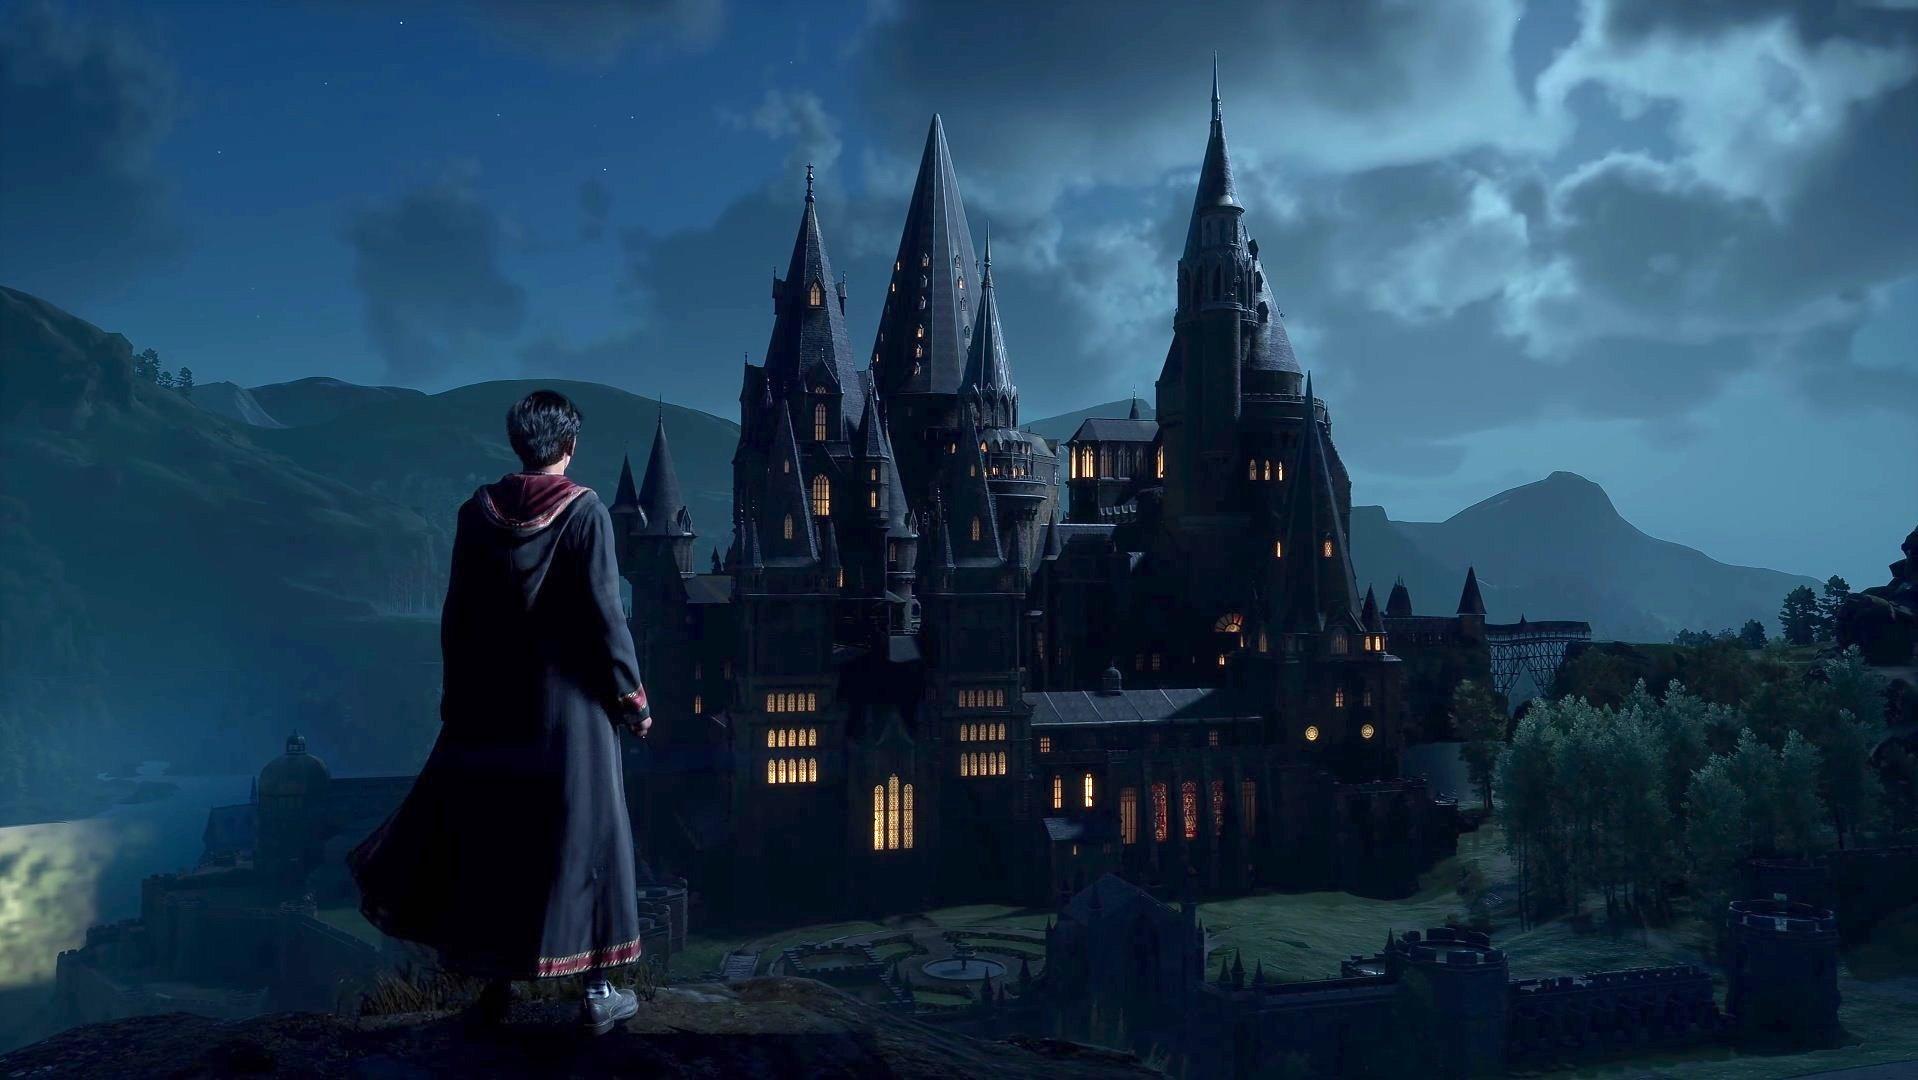 Hogwarts Legacy: Fly solo or with friends? Multiplayer possibility in the  air - Hindustan Times